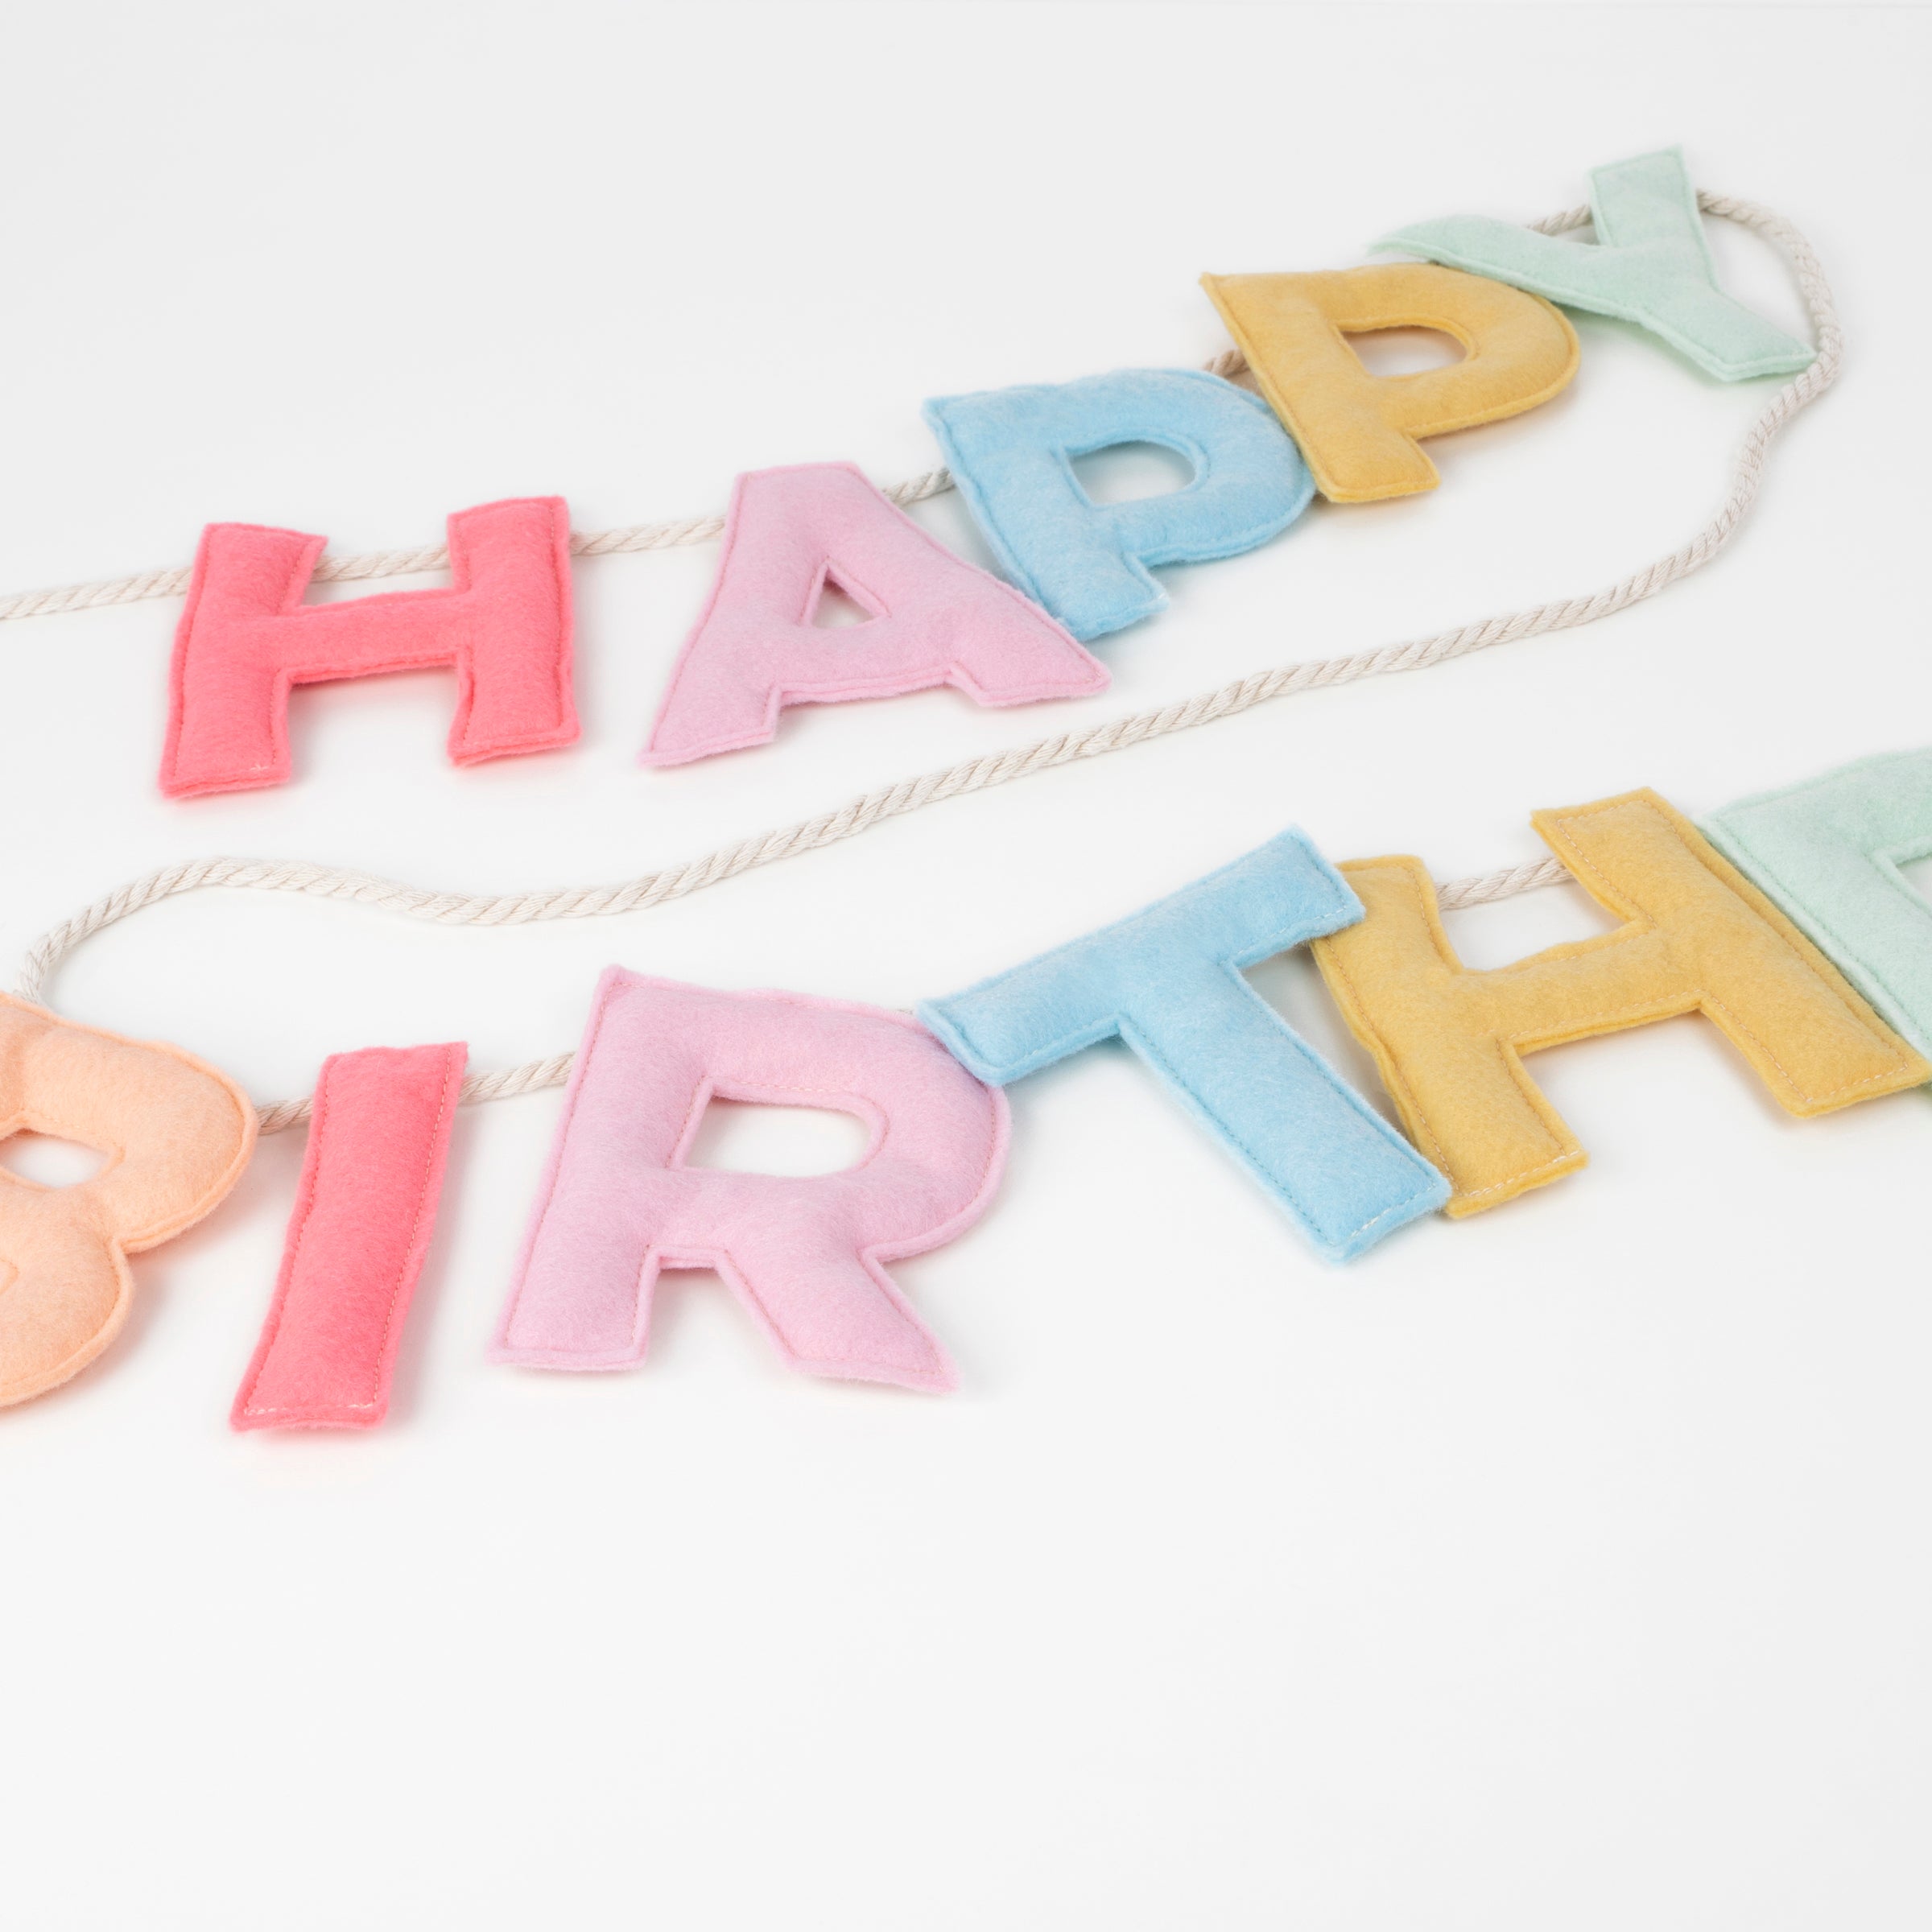 Our decorative garland, with the words Happy Birthday crafted in felt letters, is a wonderful birthday table decoration.